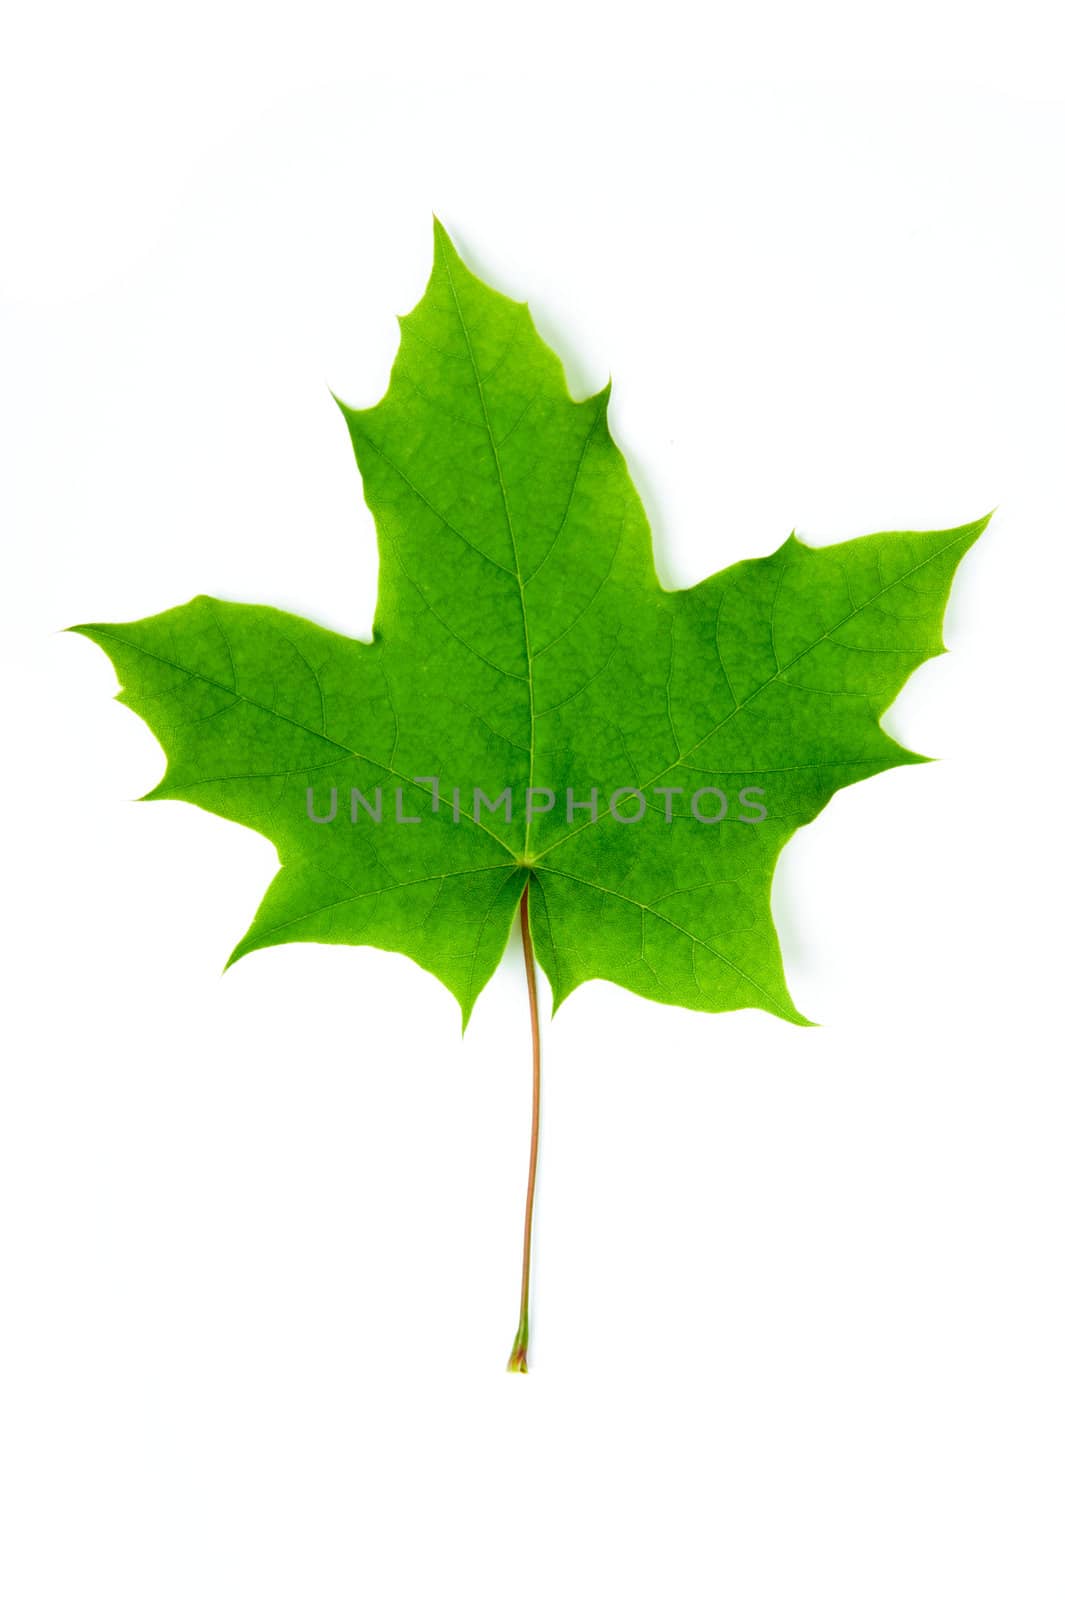 An image of fresh bright green maple leaf